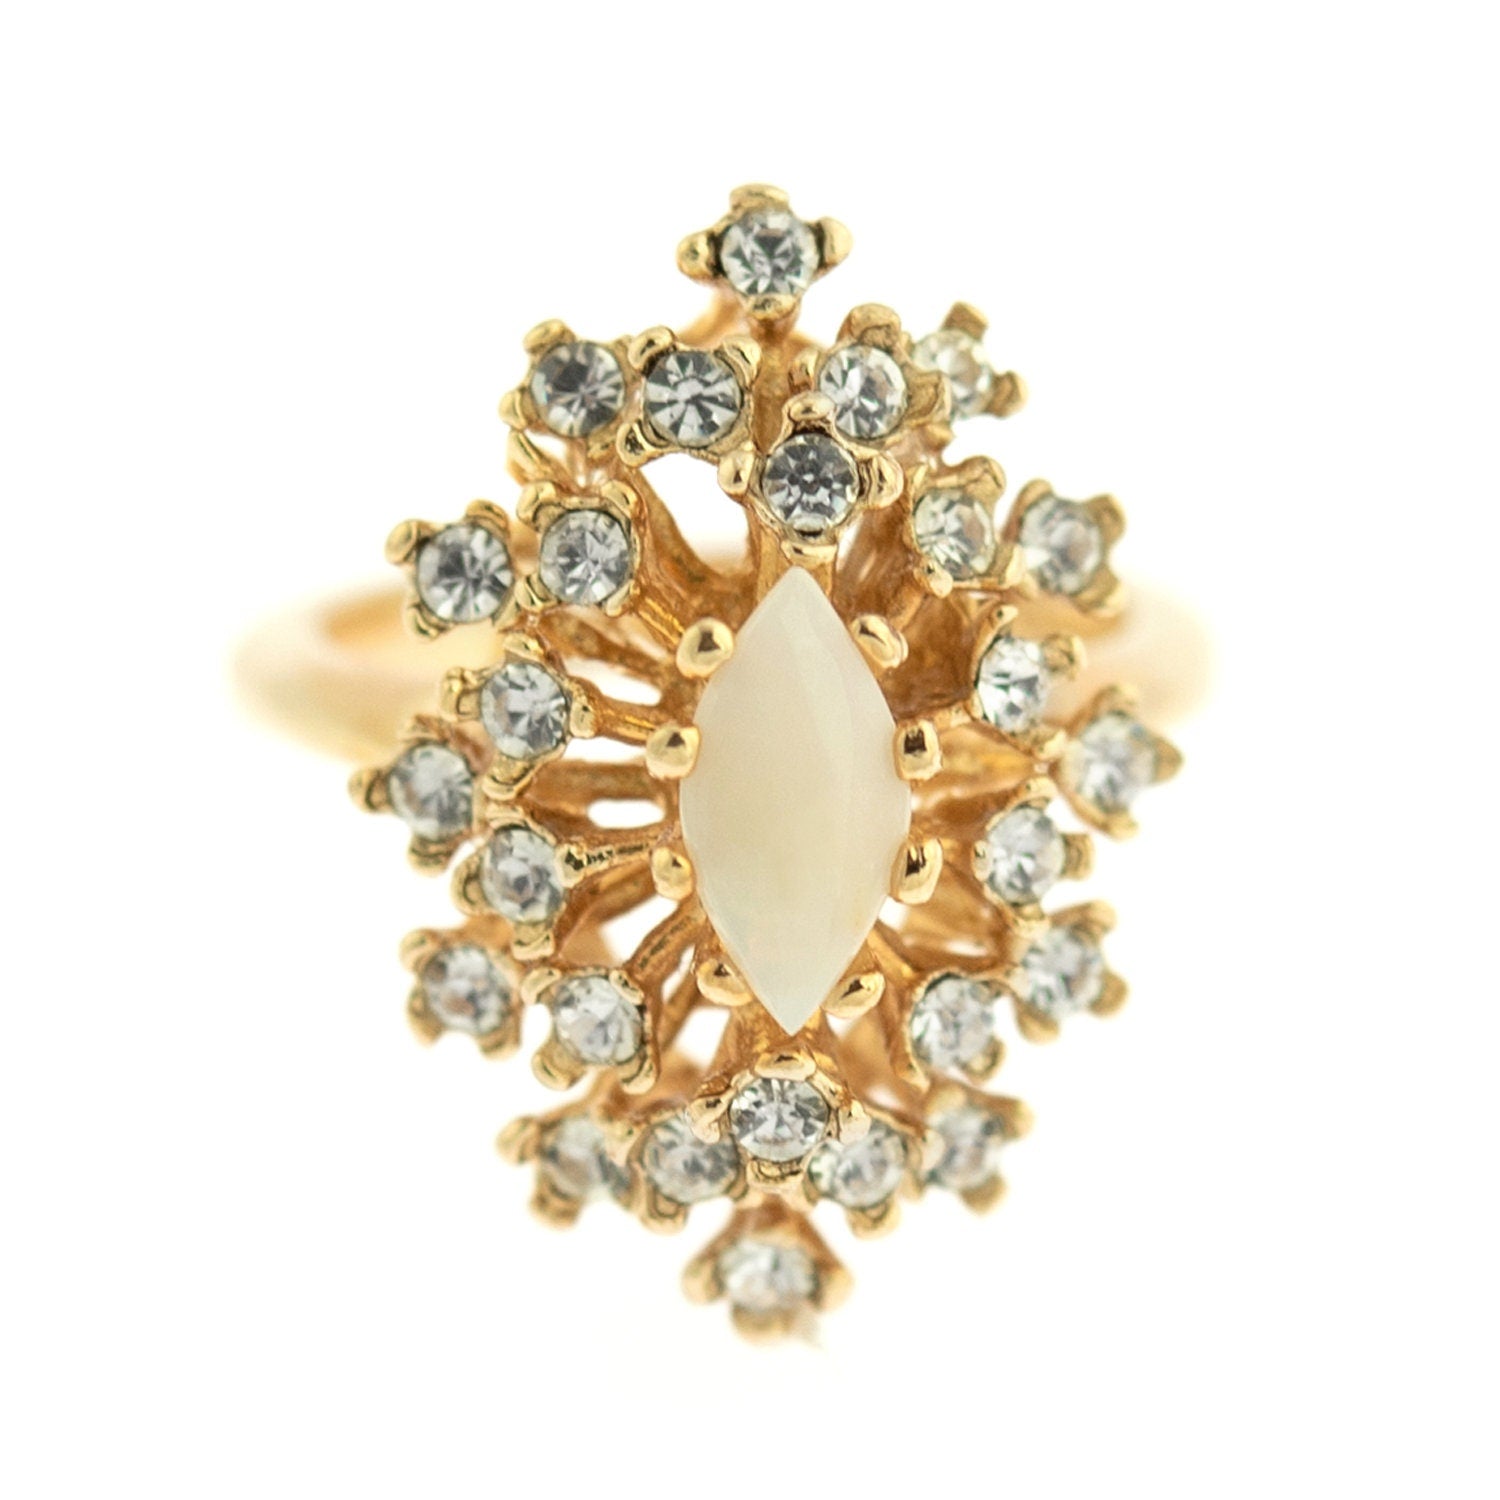 Vintage Ring Genuine Opal and Clear Swarovski Crystals 18k Gold Victorian Style #R221 - Limited Stock - Never Worn